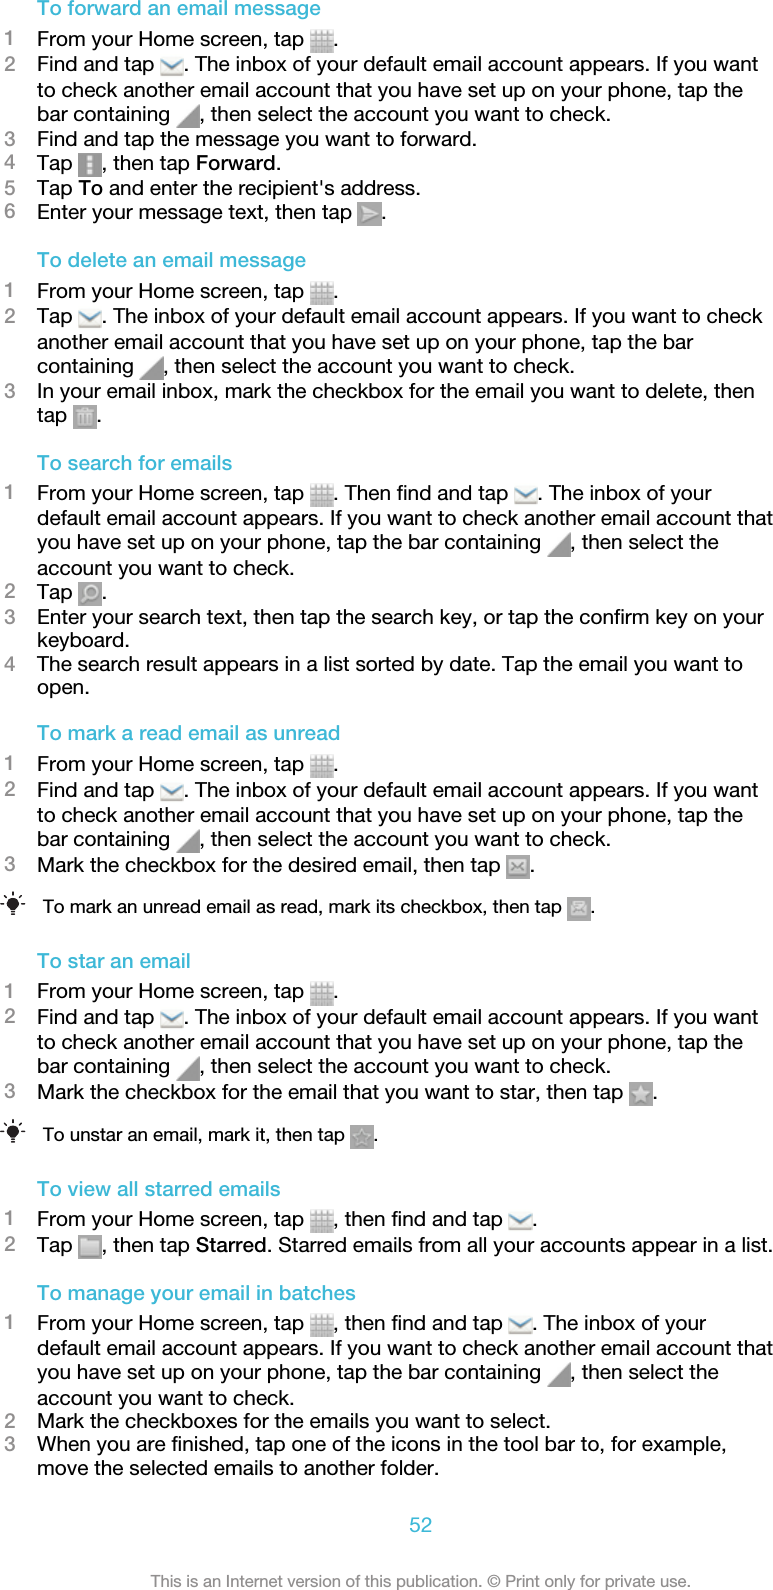 To forward an email message1From your Home screen, tap  .2Find and tap  . The inbox of your default email account appears. If you wantto check another email account that you have set up on your phone, tap thebar containing  , then select the account you want to check.3Find and tap the message you want to forward.4Tap  , then tap Forward.5Tap To and enter the recipient&apos;s address.6Enter your message text, then tap  .To delete an email message1From your Home screen, tap  .2Tap  . The inbox of your default email account appears. If you want to checkanother email account that you have set up on your phone, tap the barcontaining  , then select the account you want to check.3In your email inbox, mark the checkbox for the email you want to delete, thentap  .To search for emails1From your Home screen, tap  . Then find and tap  . The inbox of yourdefault email account appears. If you want to check another email account thatyou have set up on your phone, tap the bar containing  , then select theaccount you want to check.2Tap  .3Enter your search text, then tap the search key, or tap the confirm key on yourkeyboard.4The search result appears in a list sorted by date. Tap the email you want toopen.To mark a read email as unread1From your Home screen, tap  .2Find and tap  . The inbox of your default email account appears. If you wantto check another email account that you have set up on your phone, tap thebar containing  , then select the account you want to check.3Mark the checkbox for the desired email, then tap  .To mark an unread email as read, mark its checkbox, then tap  .To star an email1From your Home screen, tap  .2Find and tap  . The inbox of your default email account appears. If you wantto check another email account that you have set up on your phone, tap thebar containing  , then select the account you want to check.3Mark the checkbox for the email that you want to star, then tap  .To unstar an email, mark it, then tap  .To view all starred emails1From your Home screen, tap  , then find and tap  .2Tap  , then tap Starred. Starred emails from all your accounts appear in a list.To manage your email in batches1From your Home screen, tap  , then find and tap  . The inbox of yourdefault email account appears. If you want to check another email account thatyou have set up on your phone, tap the bar containing  , then select theaccount you want to check.2Mark the checkboxes for the emails you want to select.3When you are finished, tap one of the icons in the tool bar to, for example,move the selected emails to another folder.52This is an Internet version of this publication. © Print only for private use.